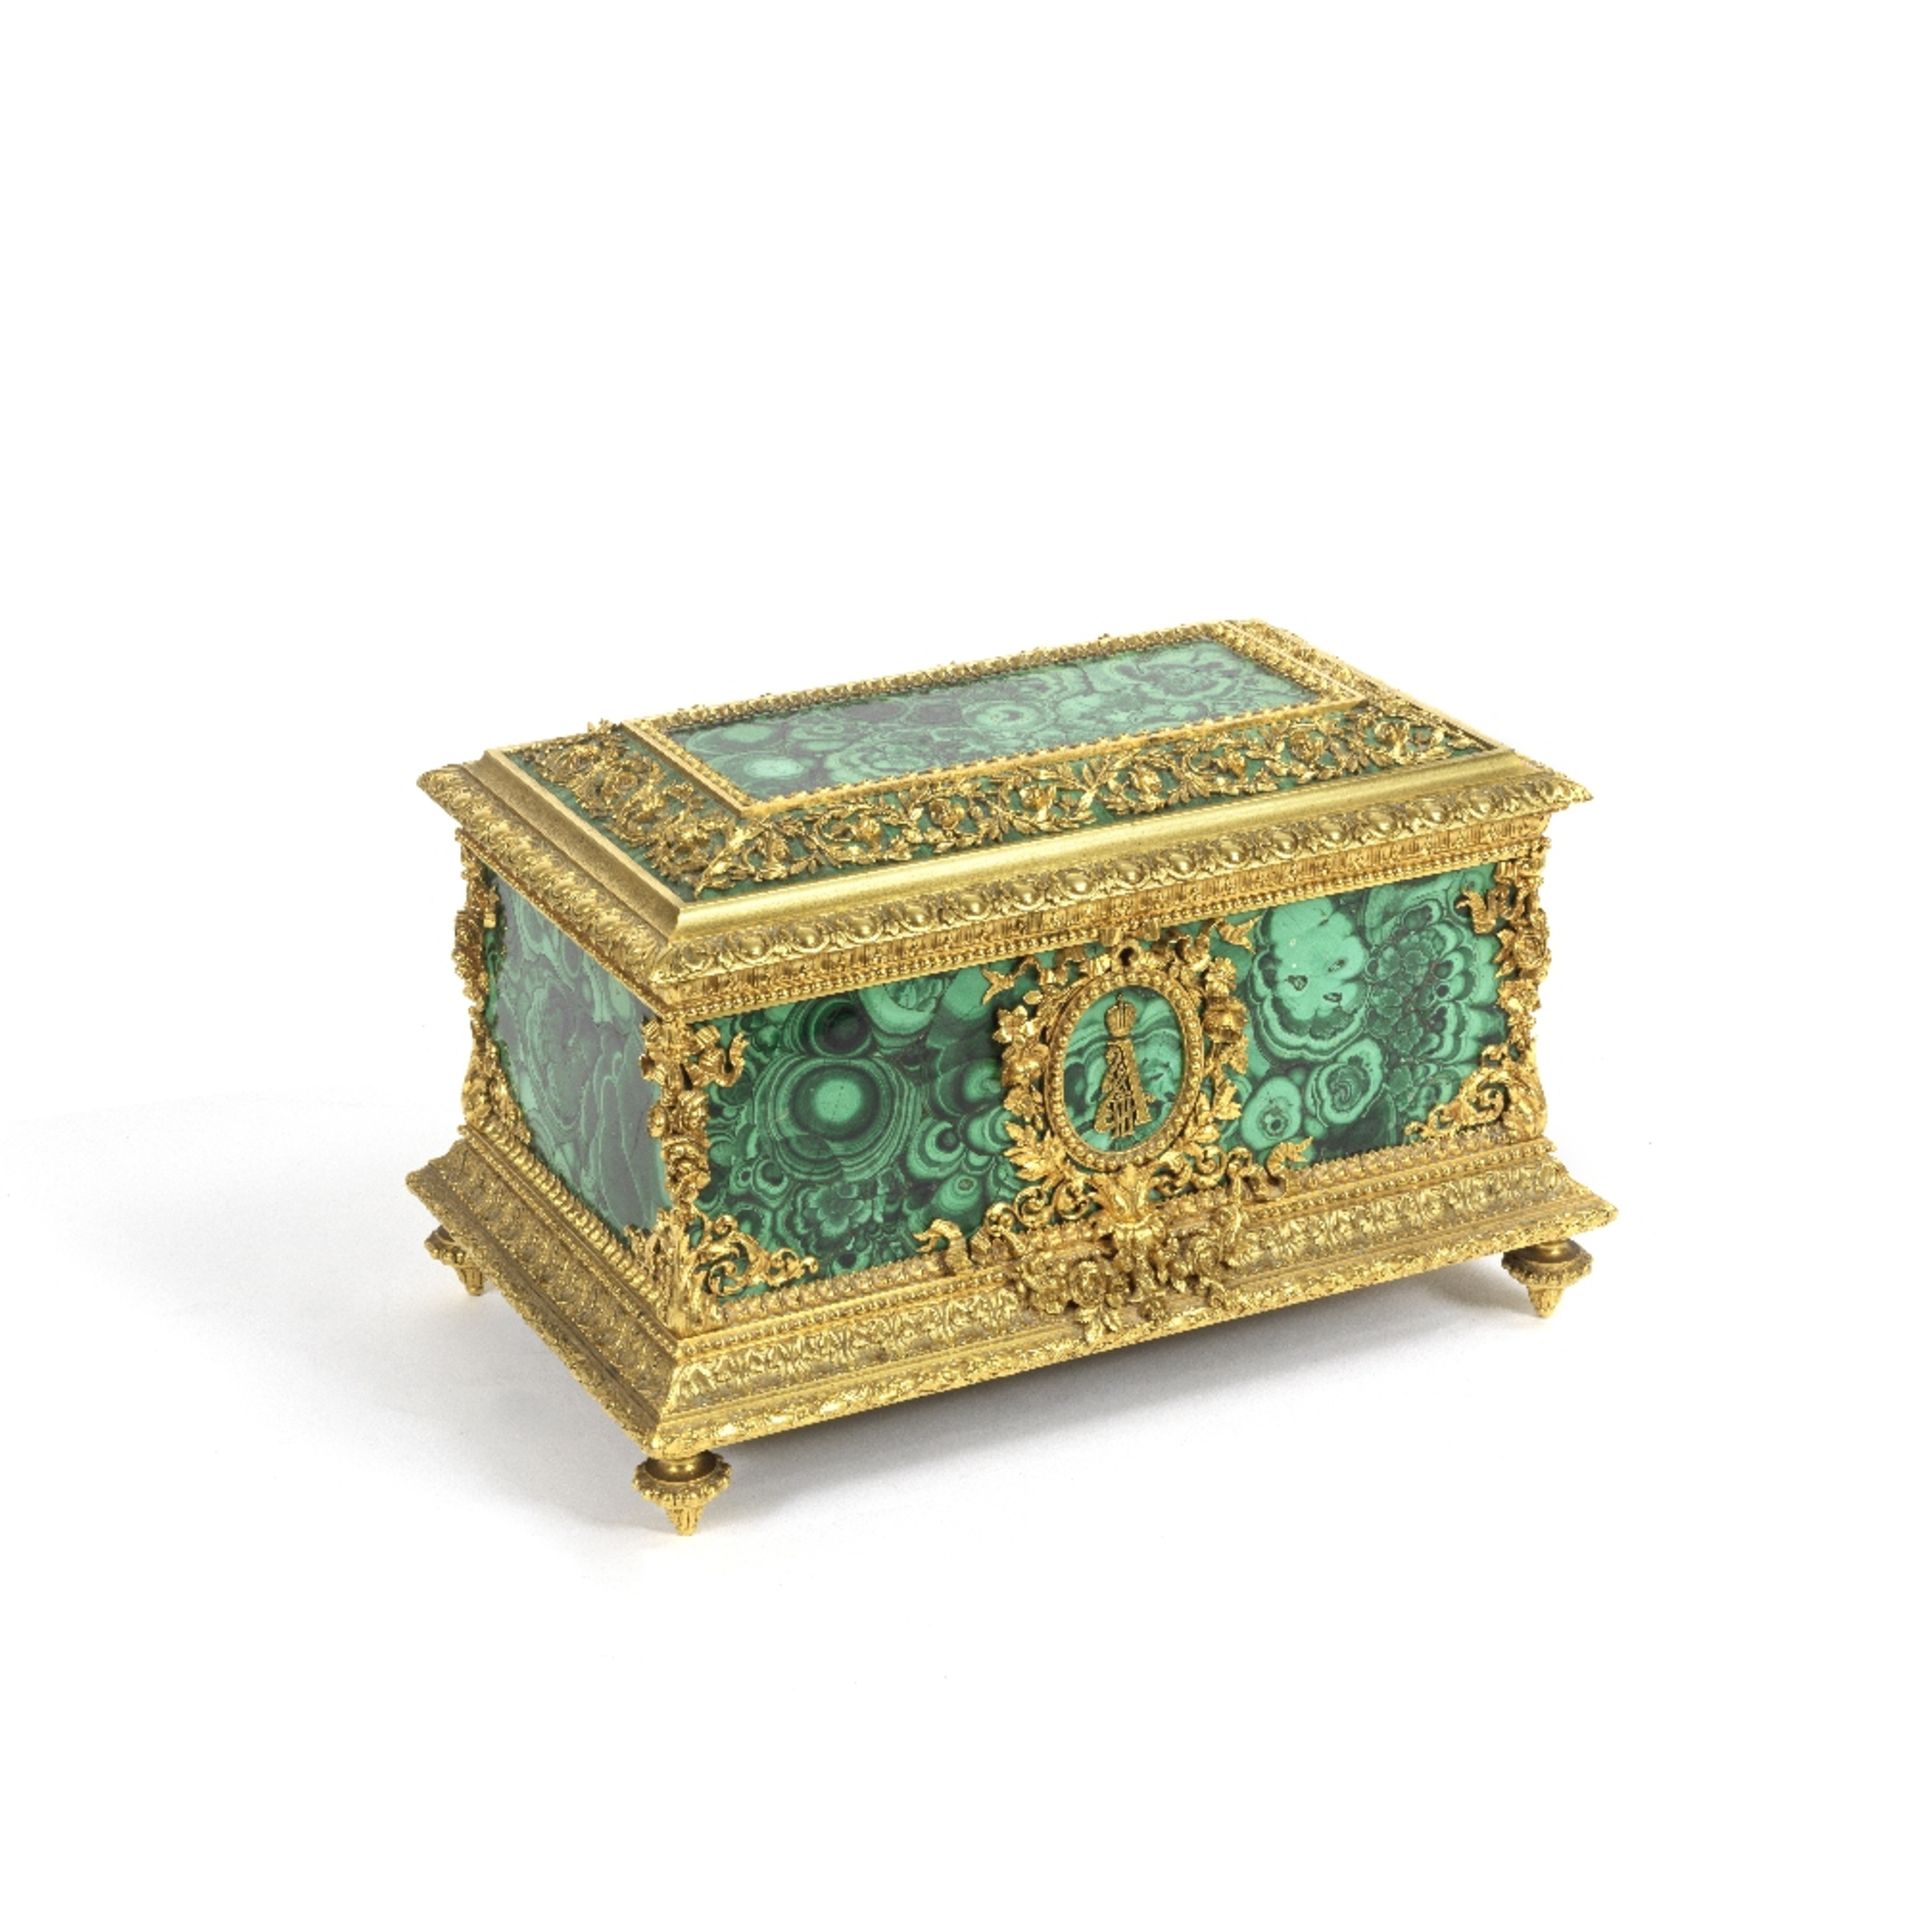 An impressive gilt bronze mounted and malachite clad jewellery casket probably Russian, late 19t...